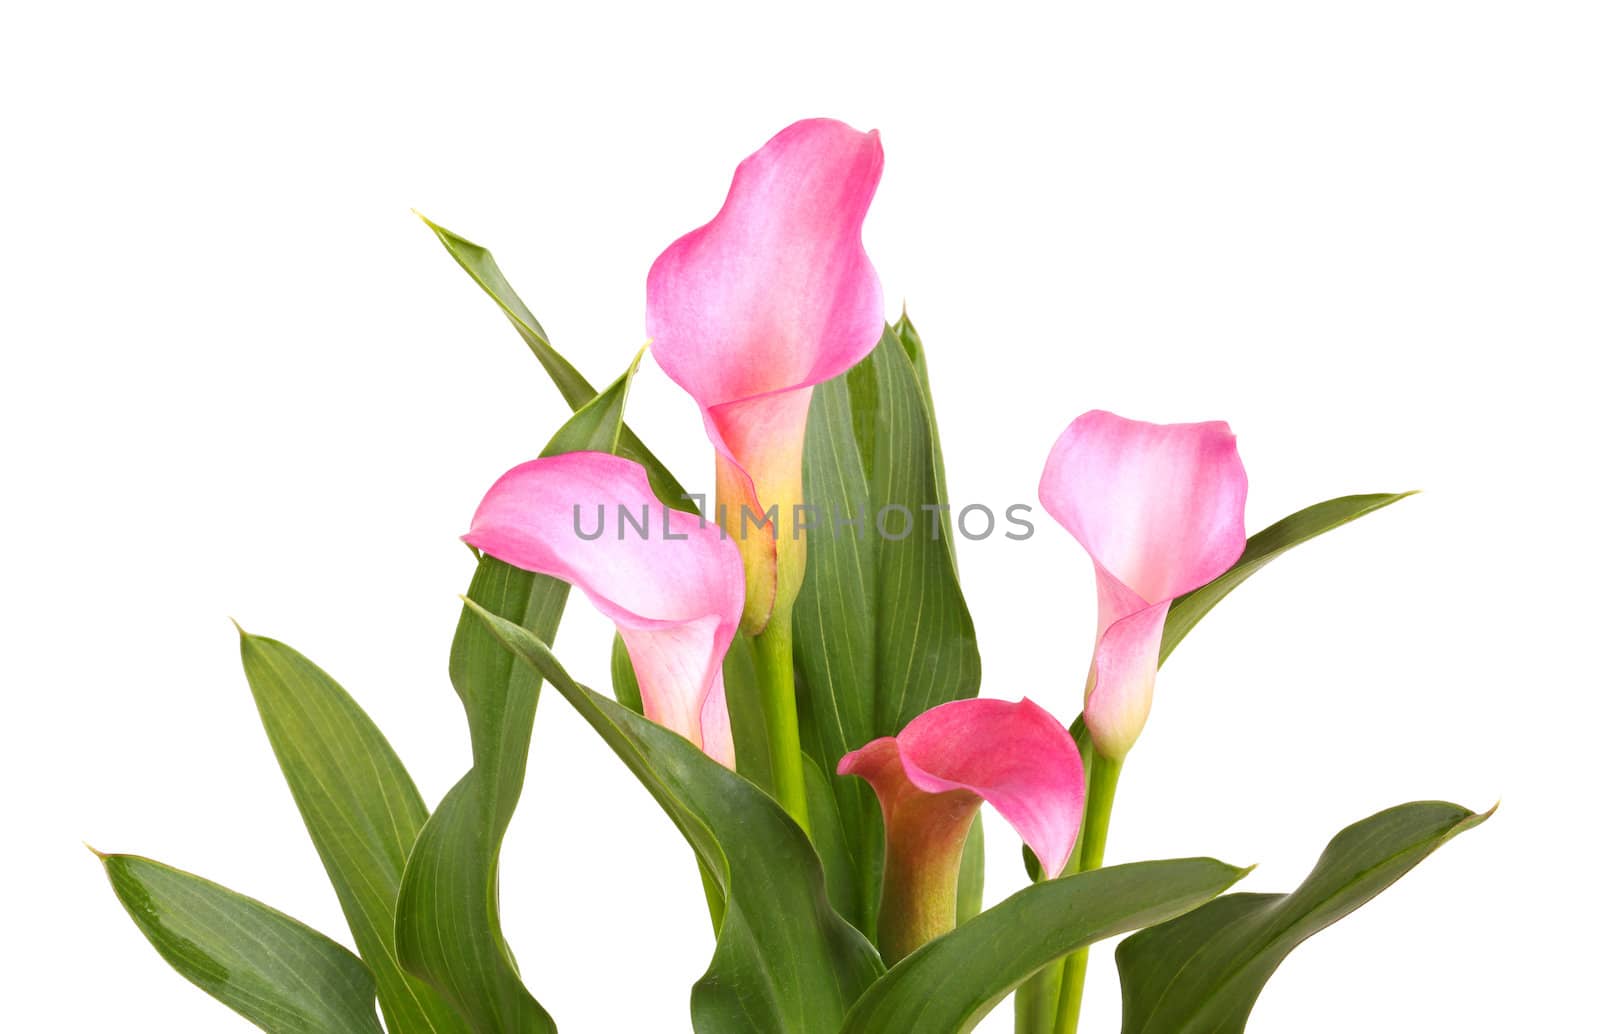 Calla lilies and leaves isolated on white by sgoodwin4813